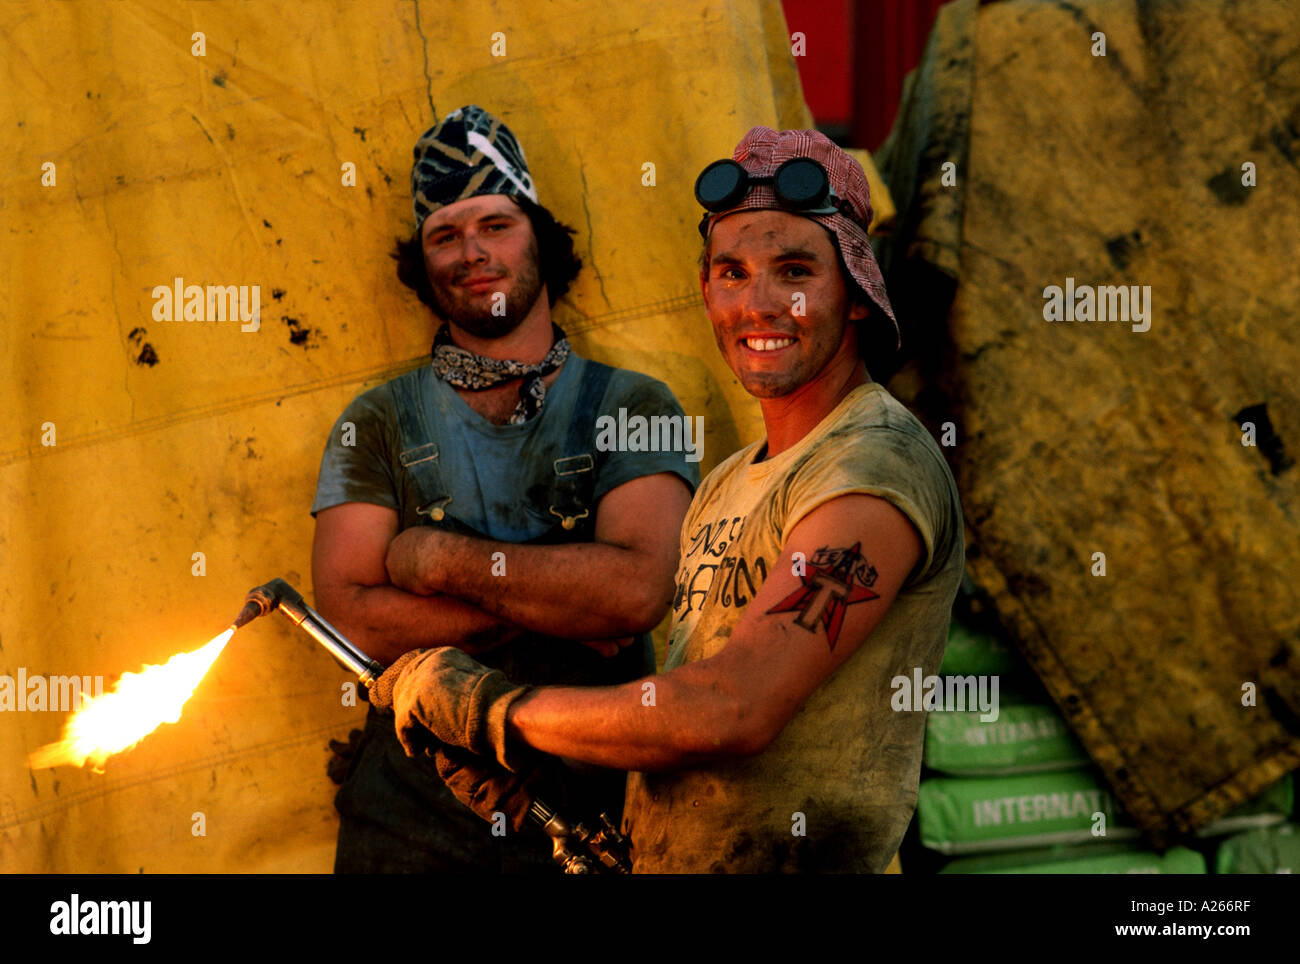 Two oil field workers take a break from a routine welding project to pose for a portrait together on a rig in South Texas. Stock Photo